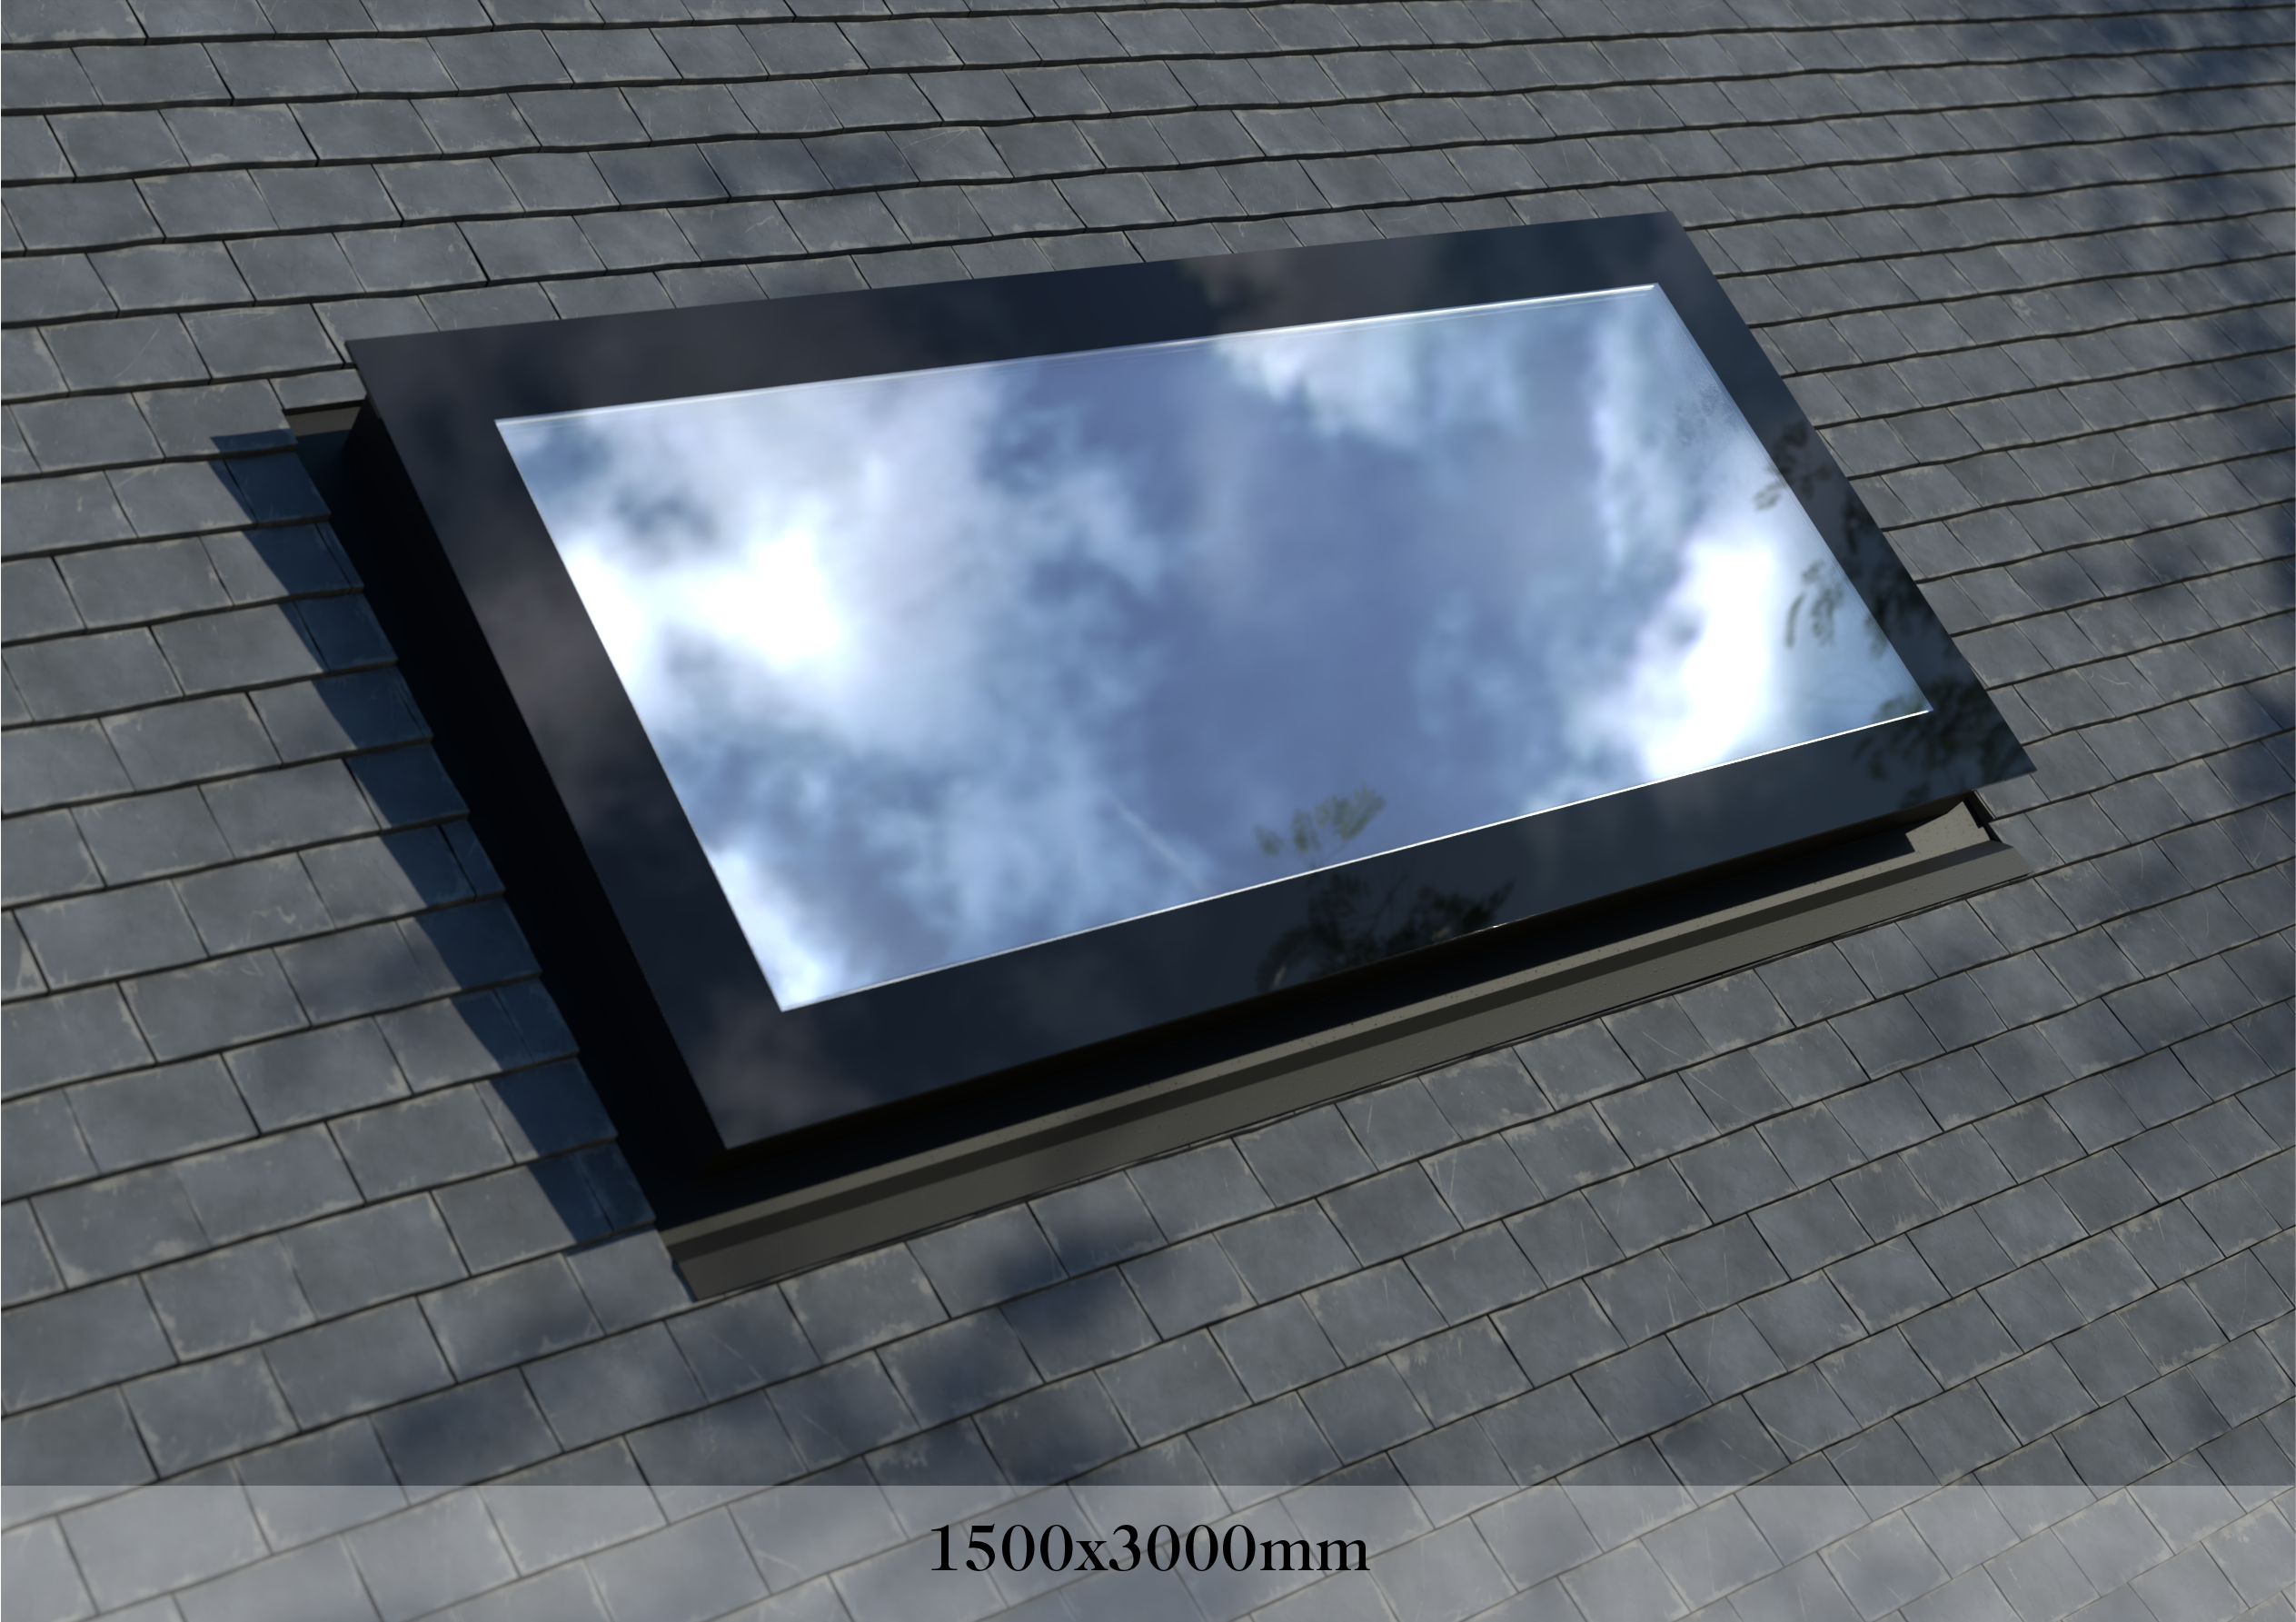 Pitched Roof Skylight 1500 x 3000 mm